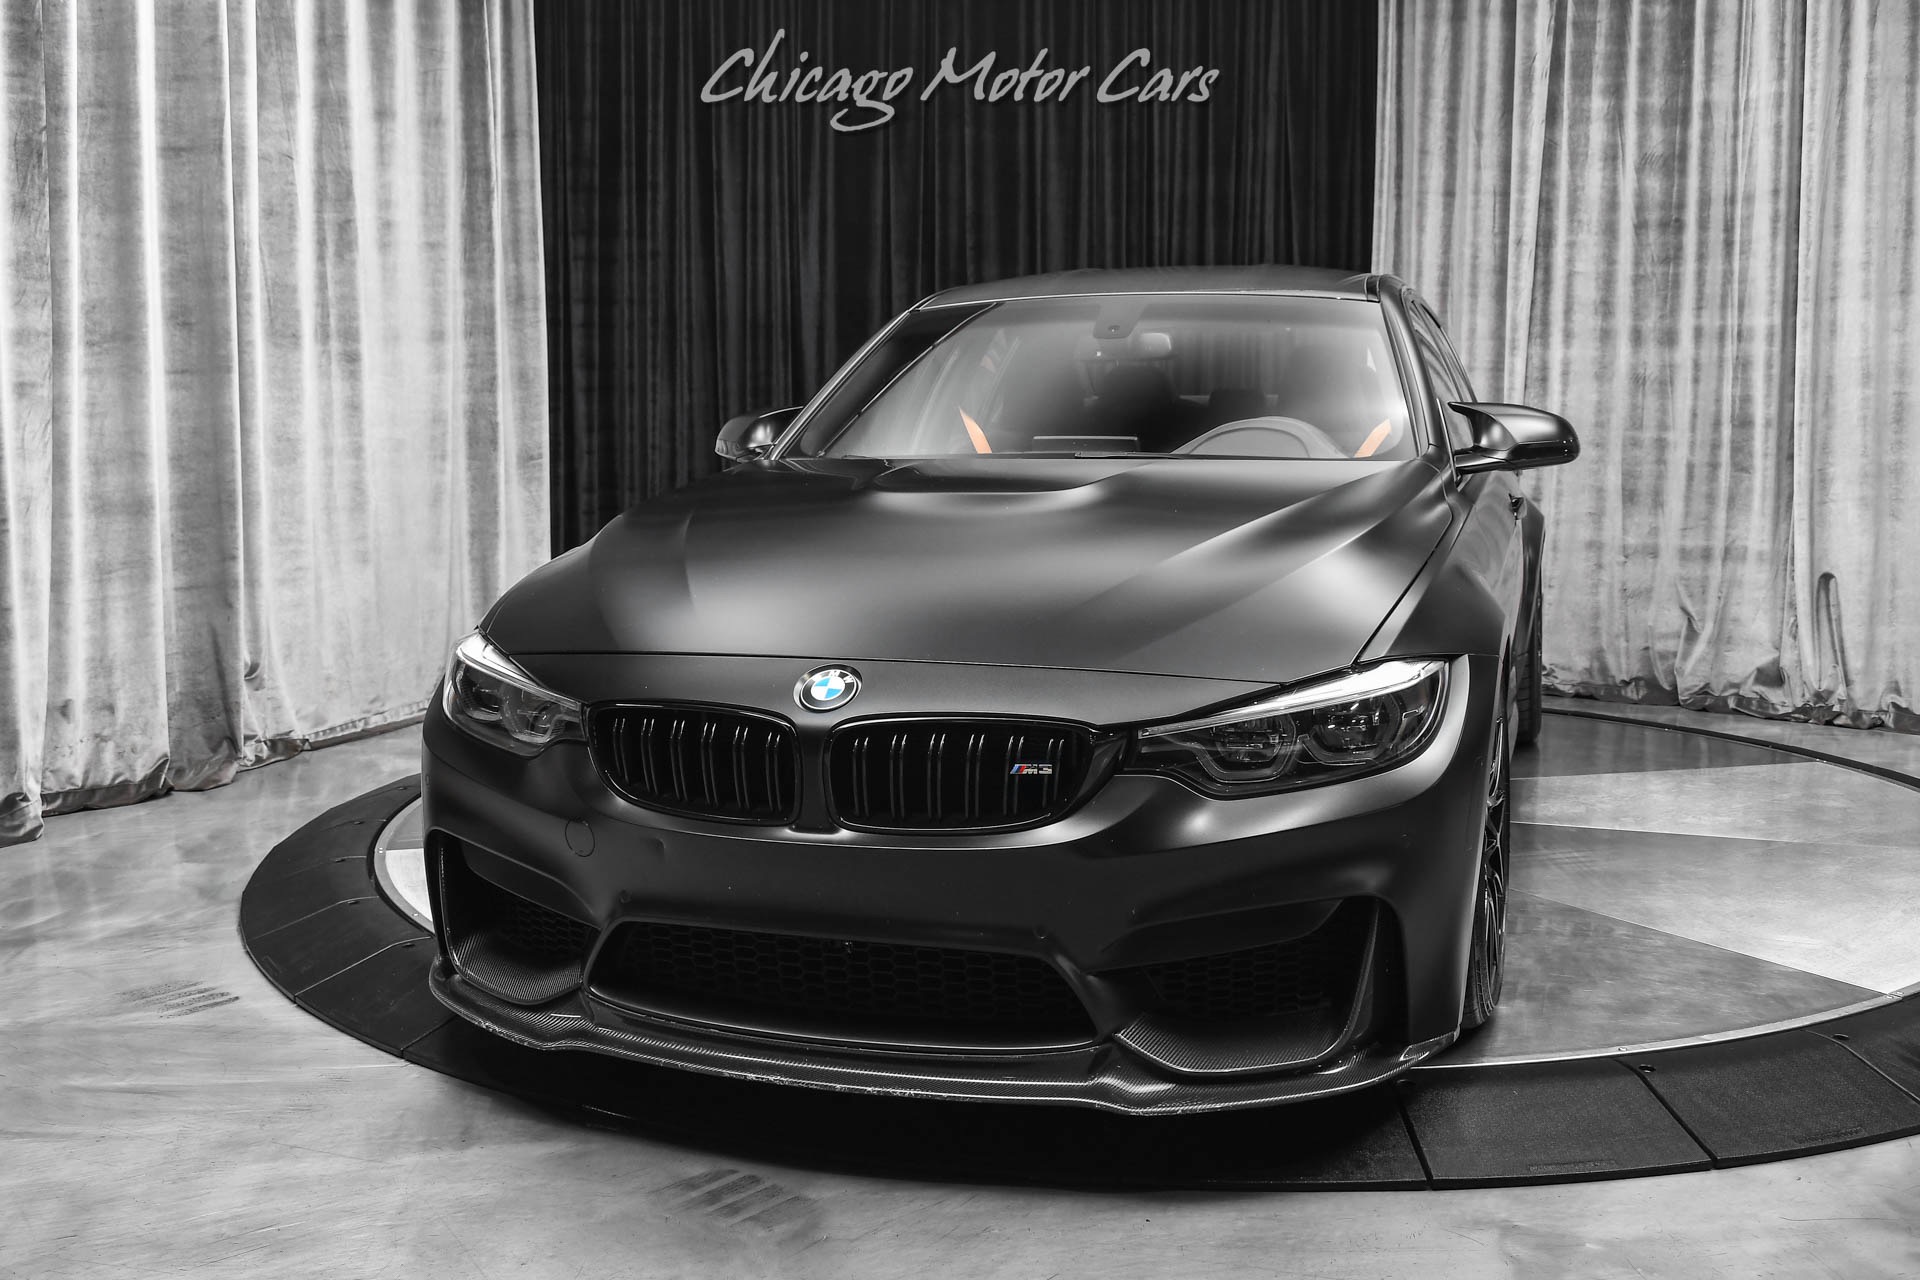 Used 2018 BMW M3 Sedan M Competition Pkg! 6-Speed Manual! FULL PPF! Carbon  Fiber! LOADED For Sale (Special Pricing) | Chicago Motor Cars Stock #19464A